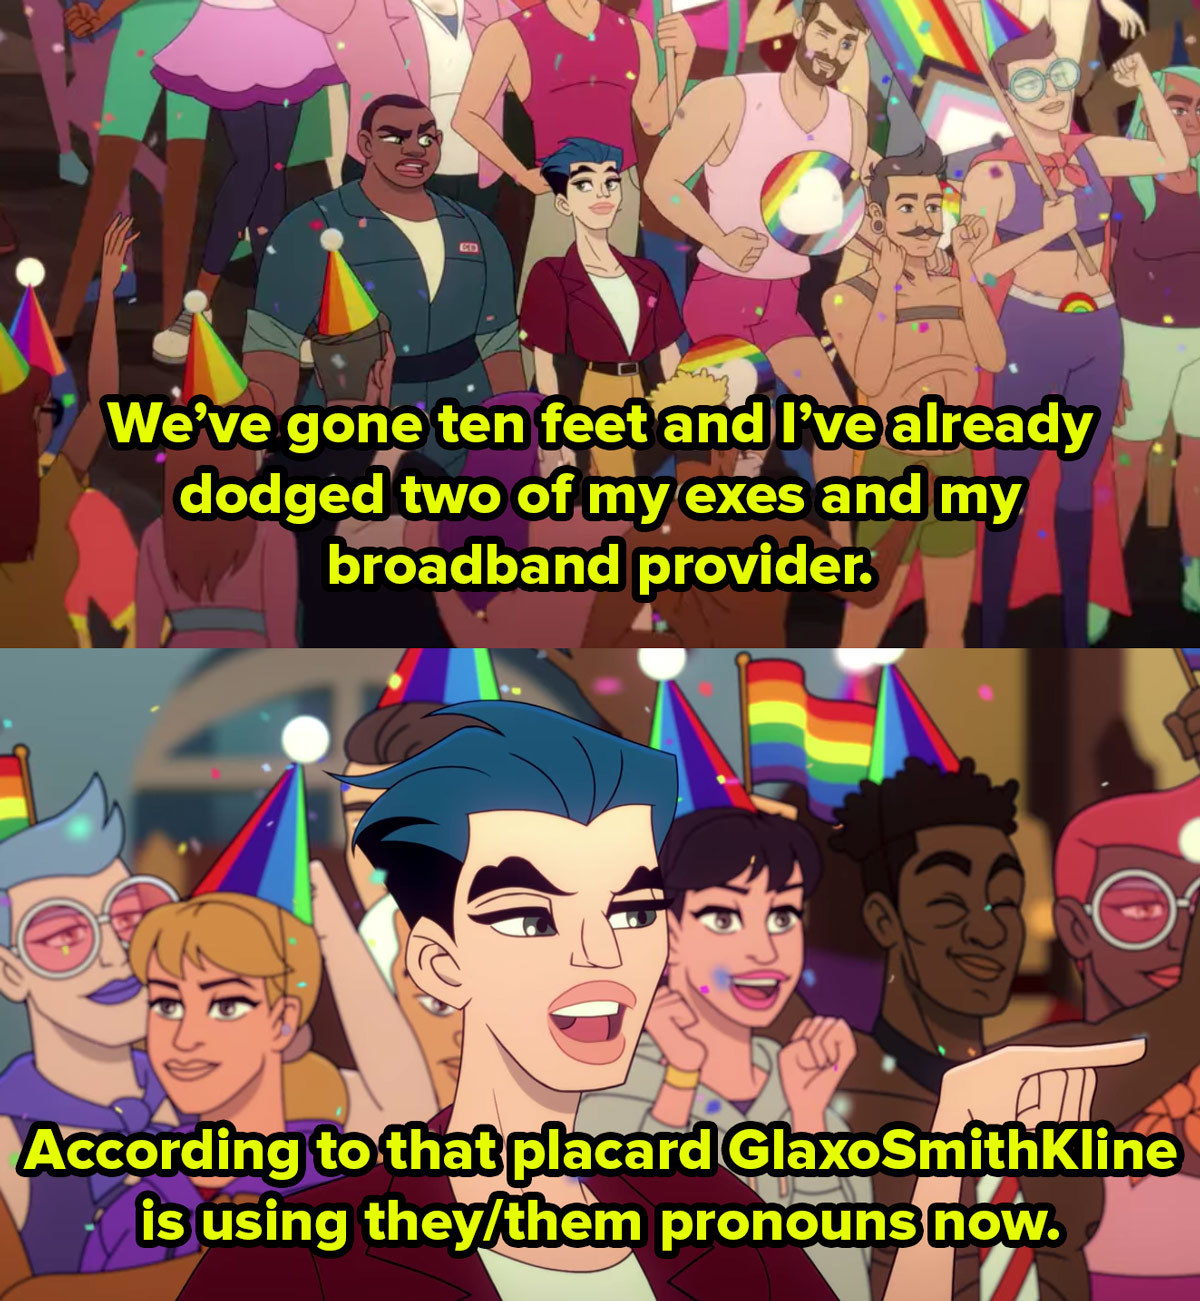 Two cartoon characters walk through a crown of LGBTQ street party-goers one says we’ve gone ten feet and I’ve already dodged two my exes and my broadband provider, the other says according to that float GlaxoSmithKline is using they/them pronouns now